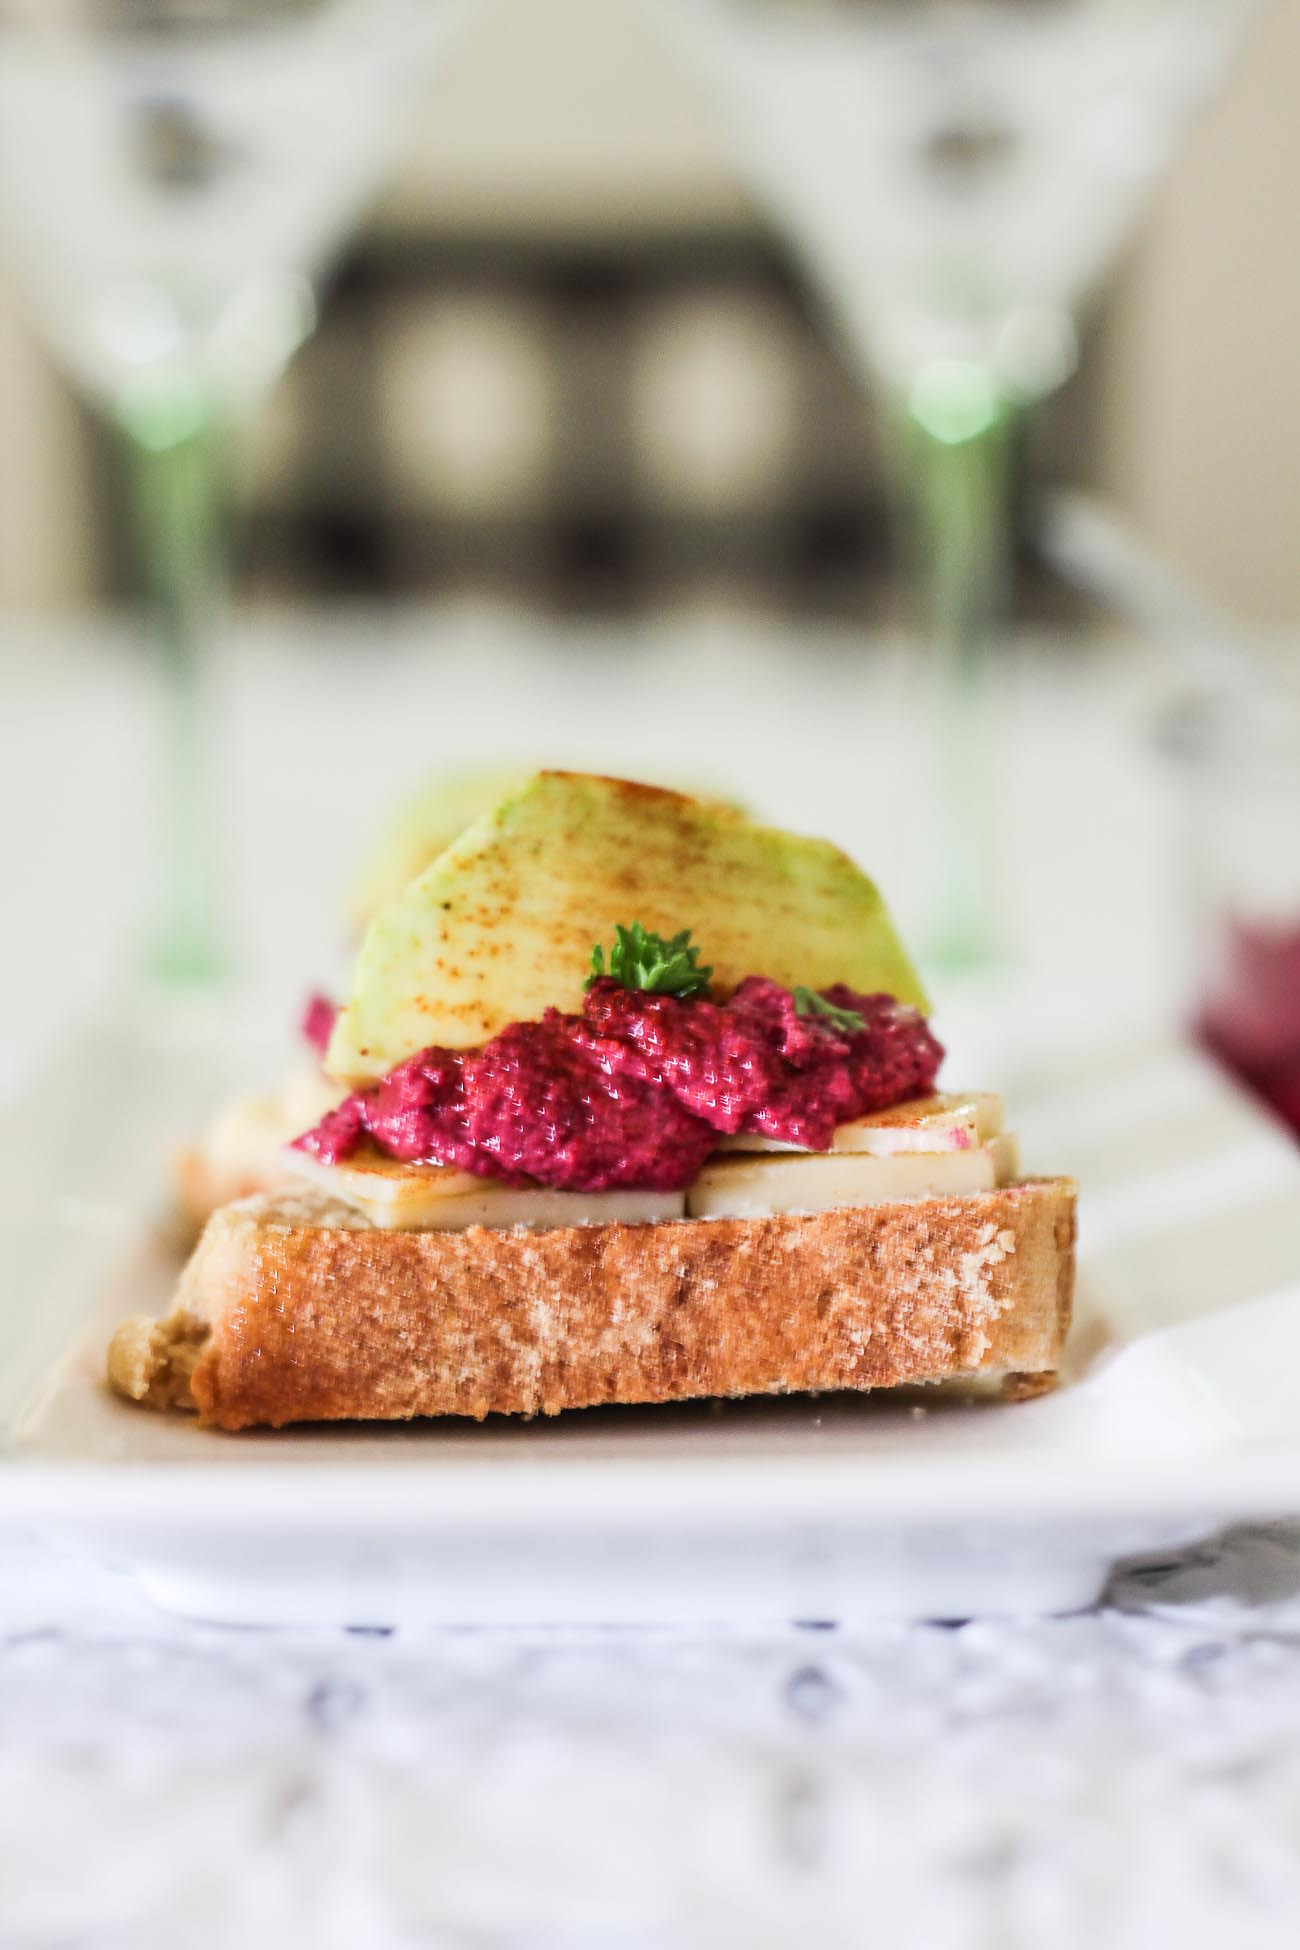 Beetroot Dip Rosemary Crostini Recipe With Fine Cheddar And Avocados